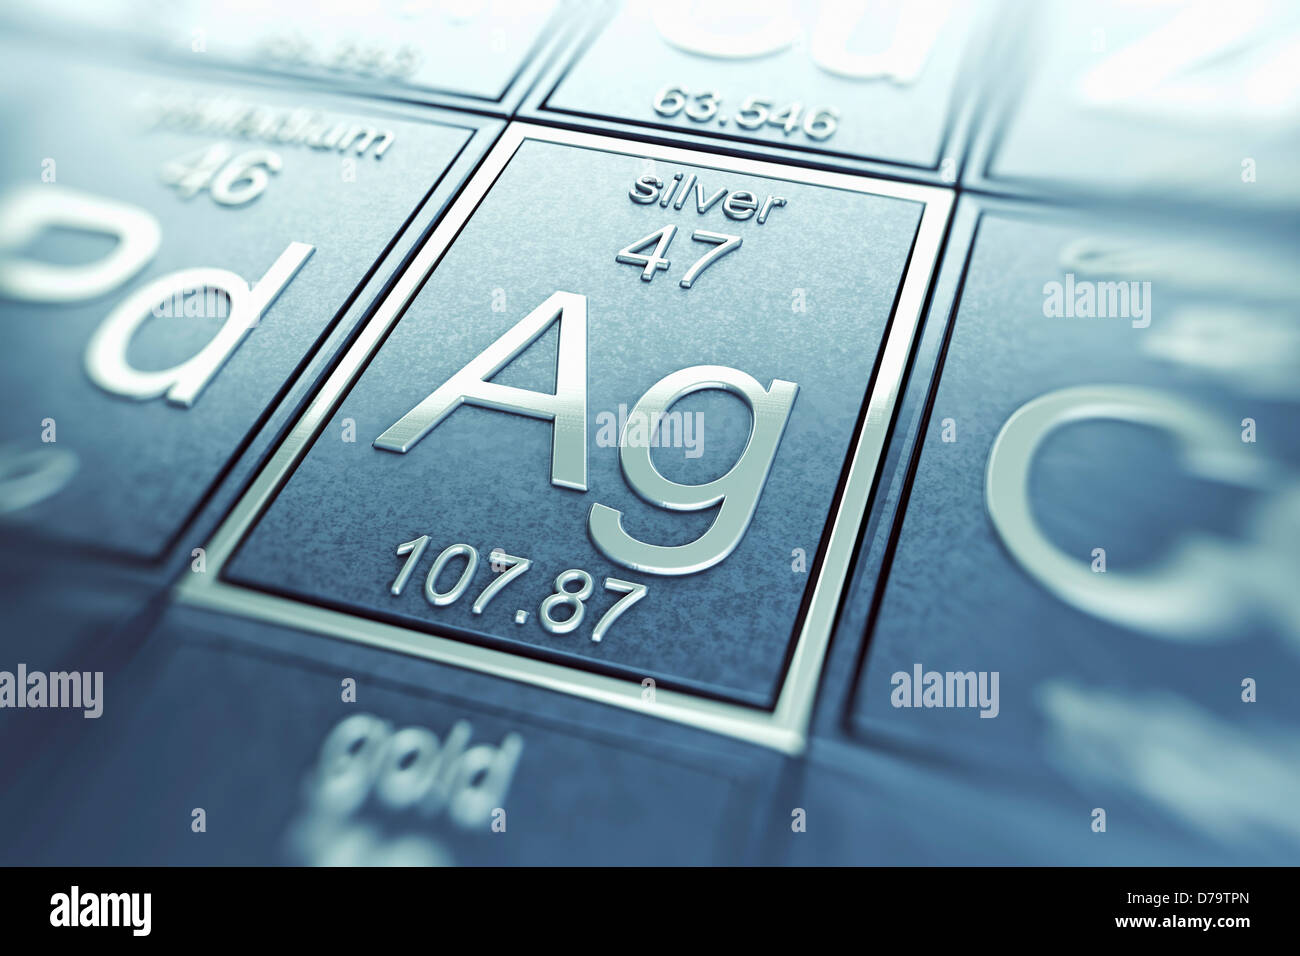 Silver Chemical Element) Stock Photo